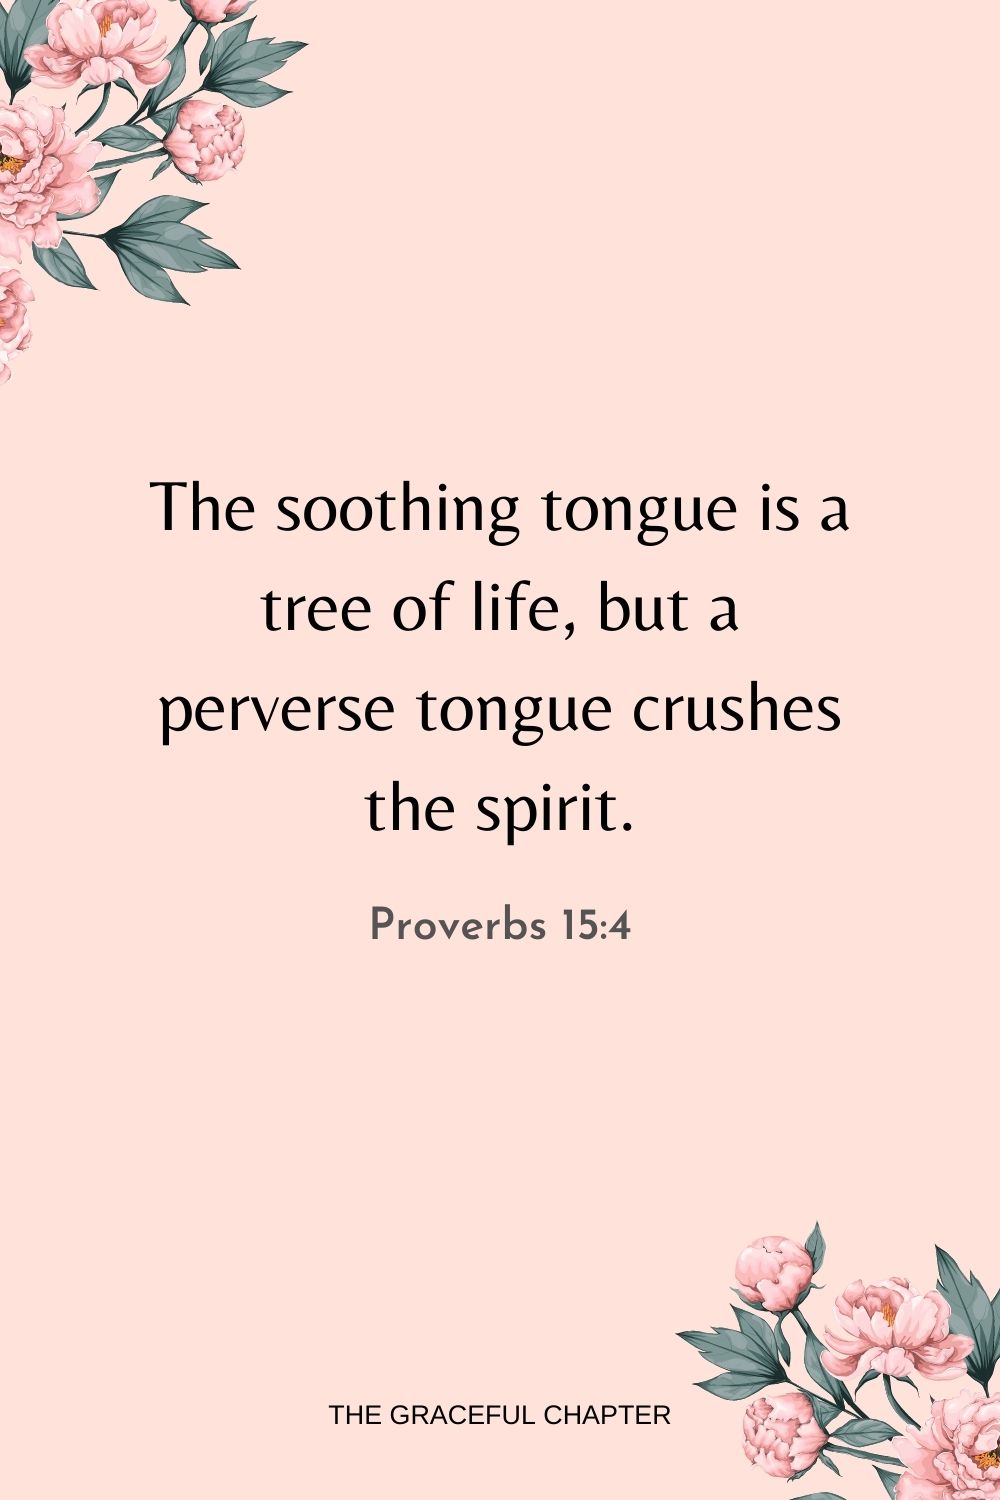 The soothing tongue is a tree of life, but a perverse tongue crushes the spirit. Proverbs 15:4